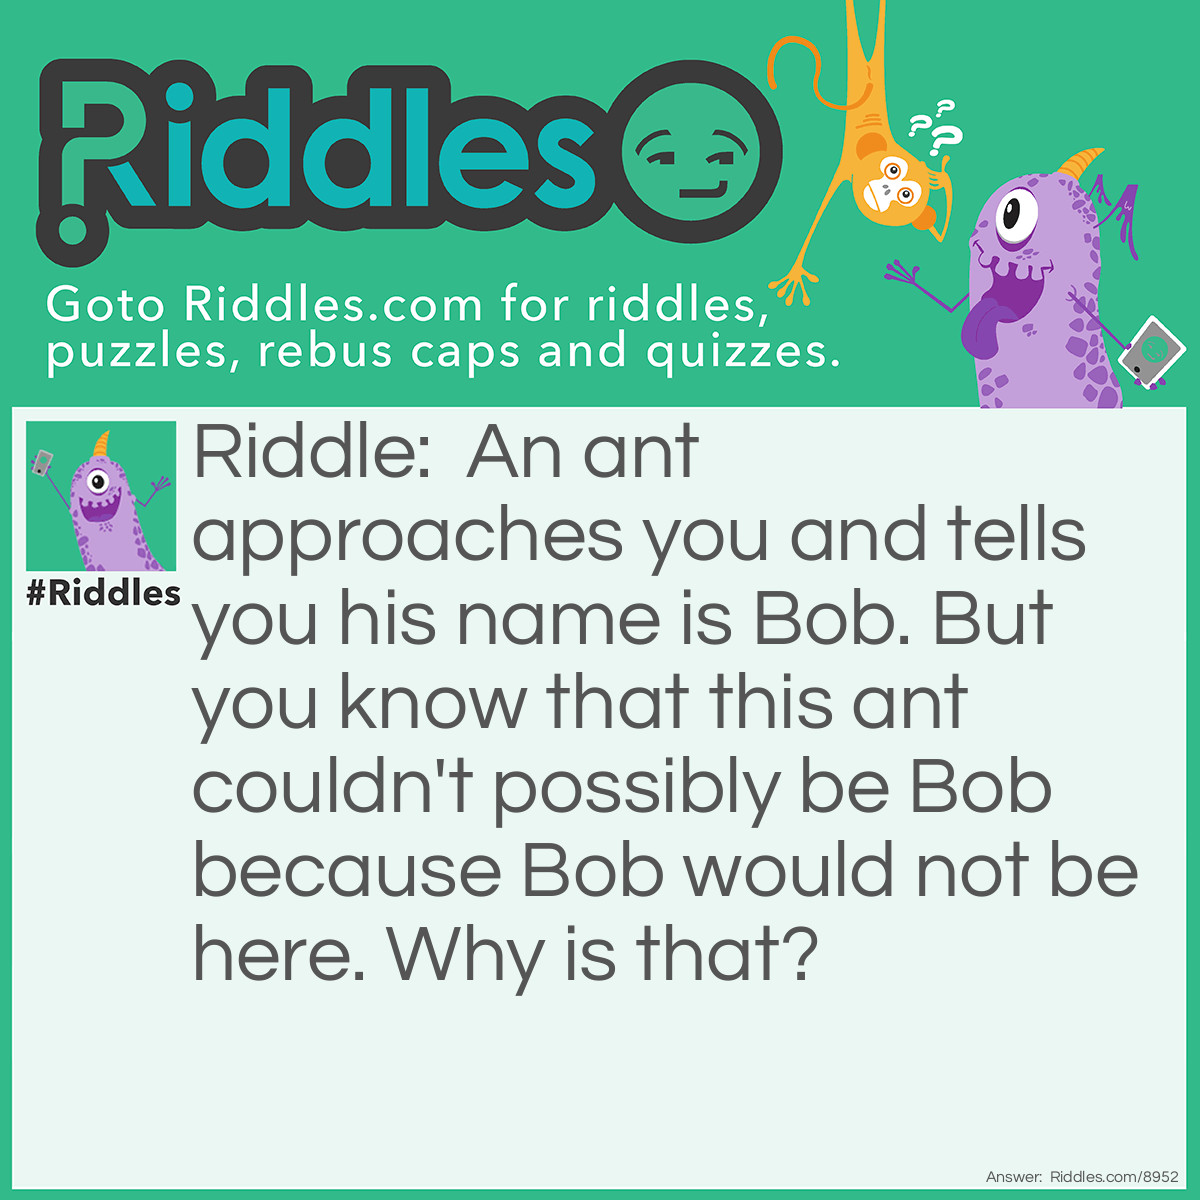 Riddle: An ant approaches you and tells you his name is Bob. But you know that this ant couldn't possibly be Bob because Bob would not be here. Why is that? Answer: Bob is always truant which makes him a true ant.